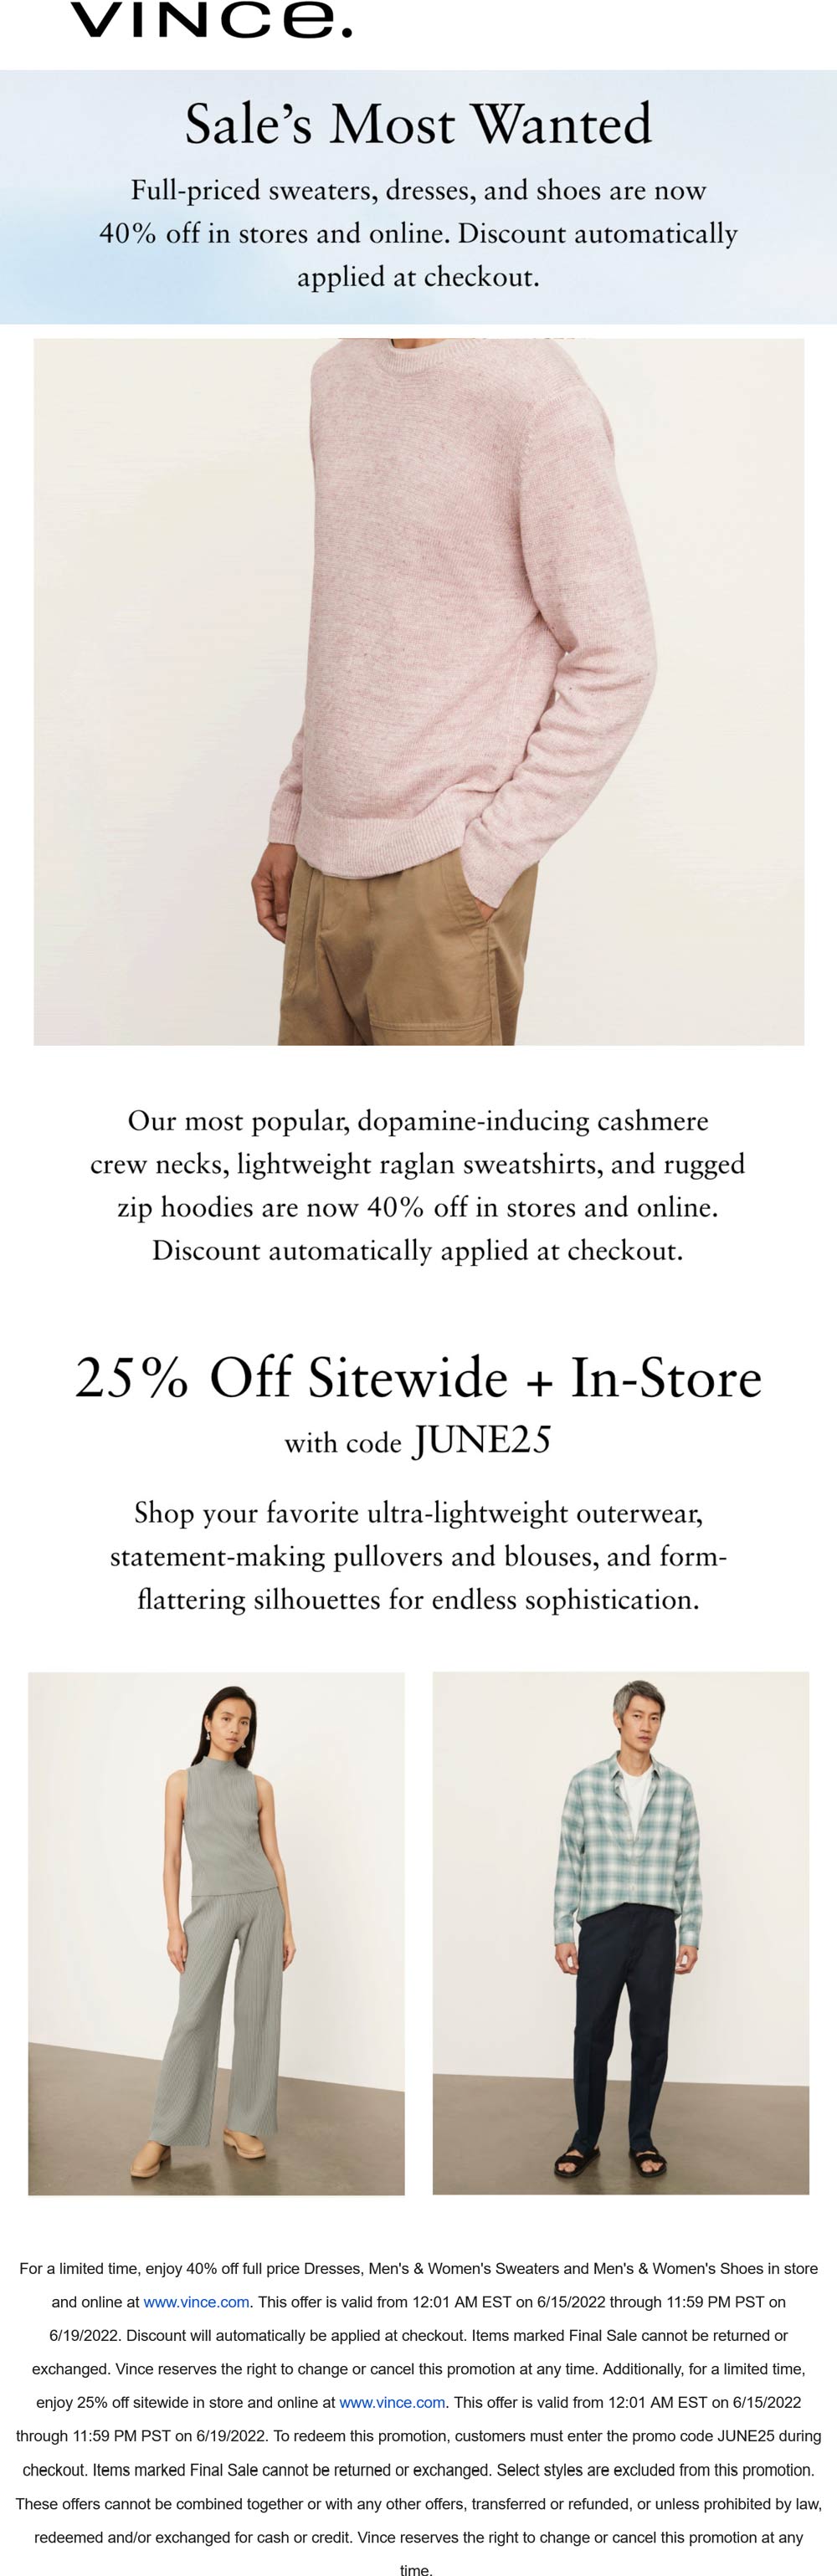 Vince stores Coupon  25-40% off everything at Vince, or online via promo code JUNE25 #vince 